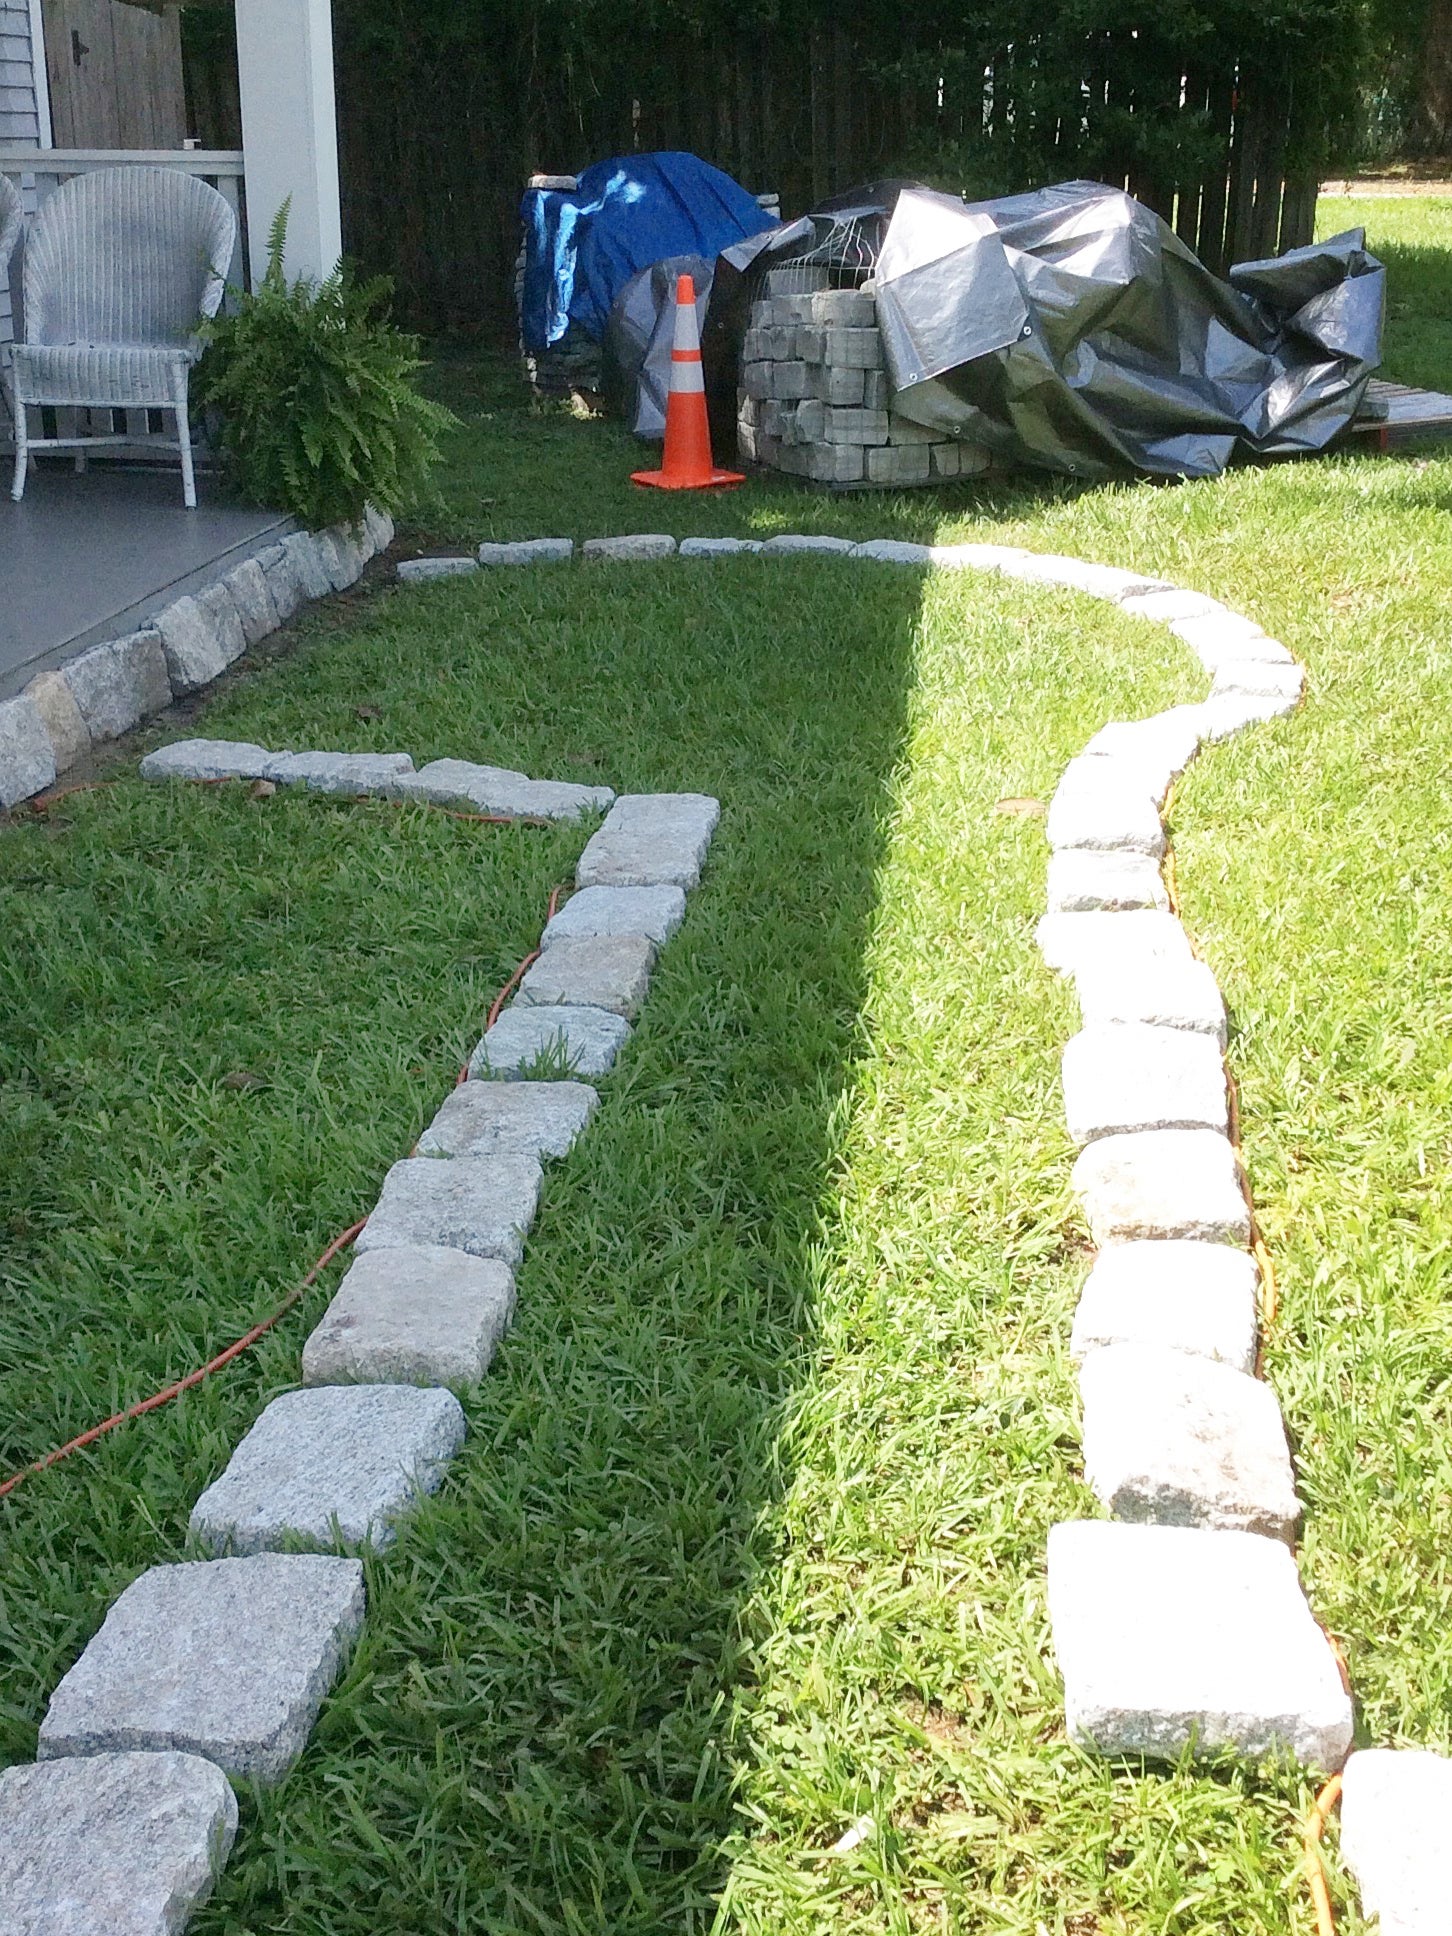 pavers being set in grass